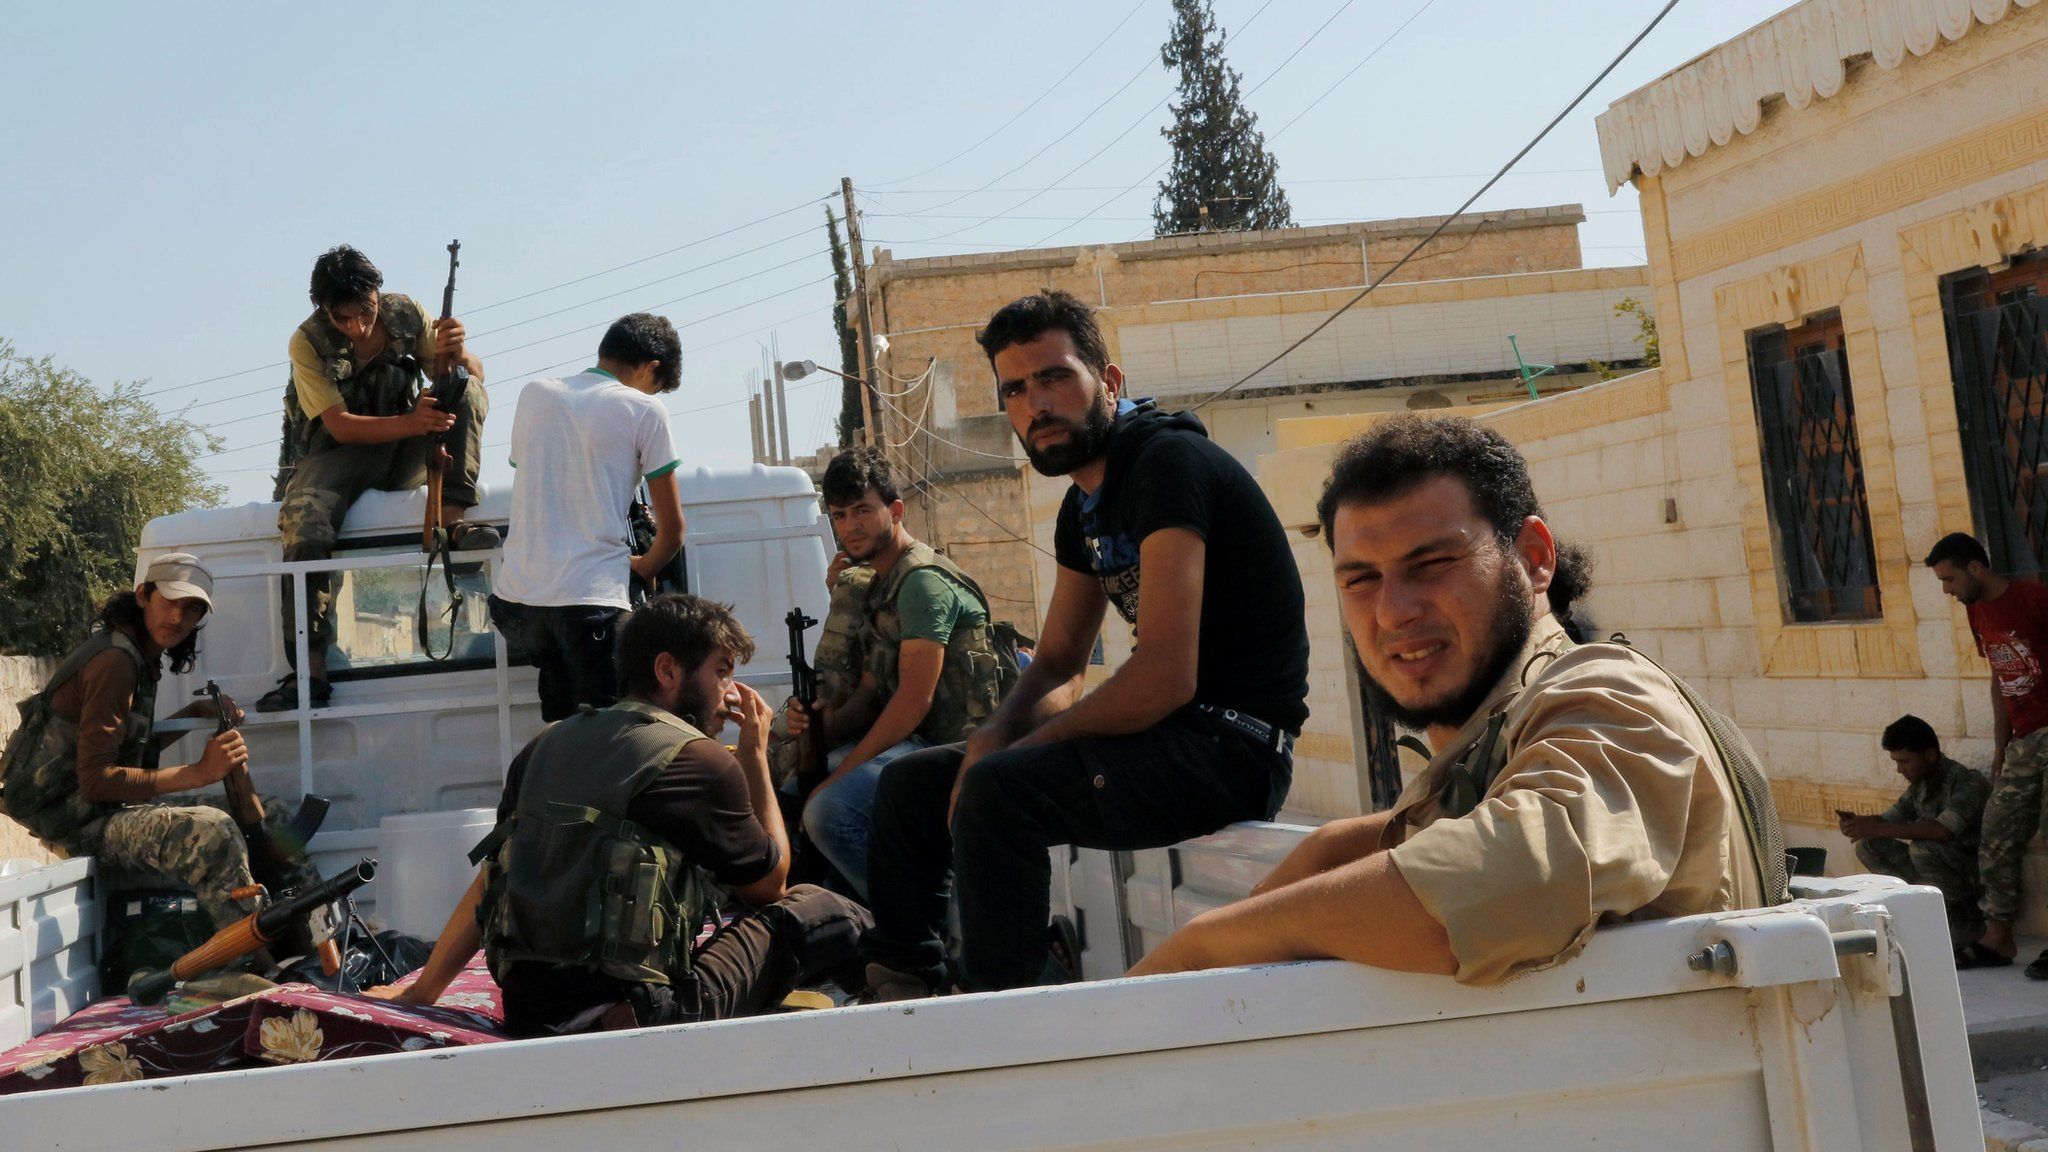 Turkish-backed Syrian rebel fighters in Jarablus on 31 August 2016